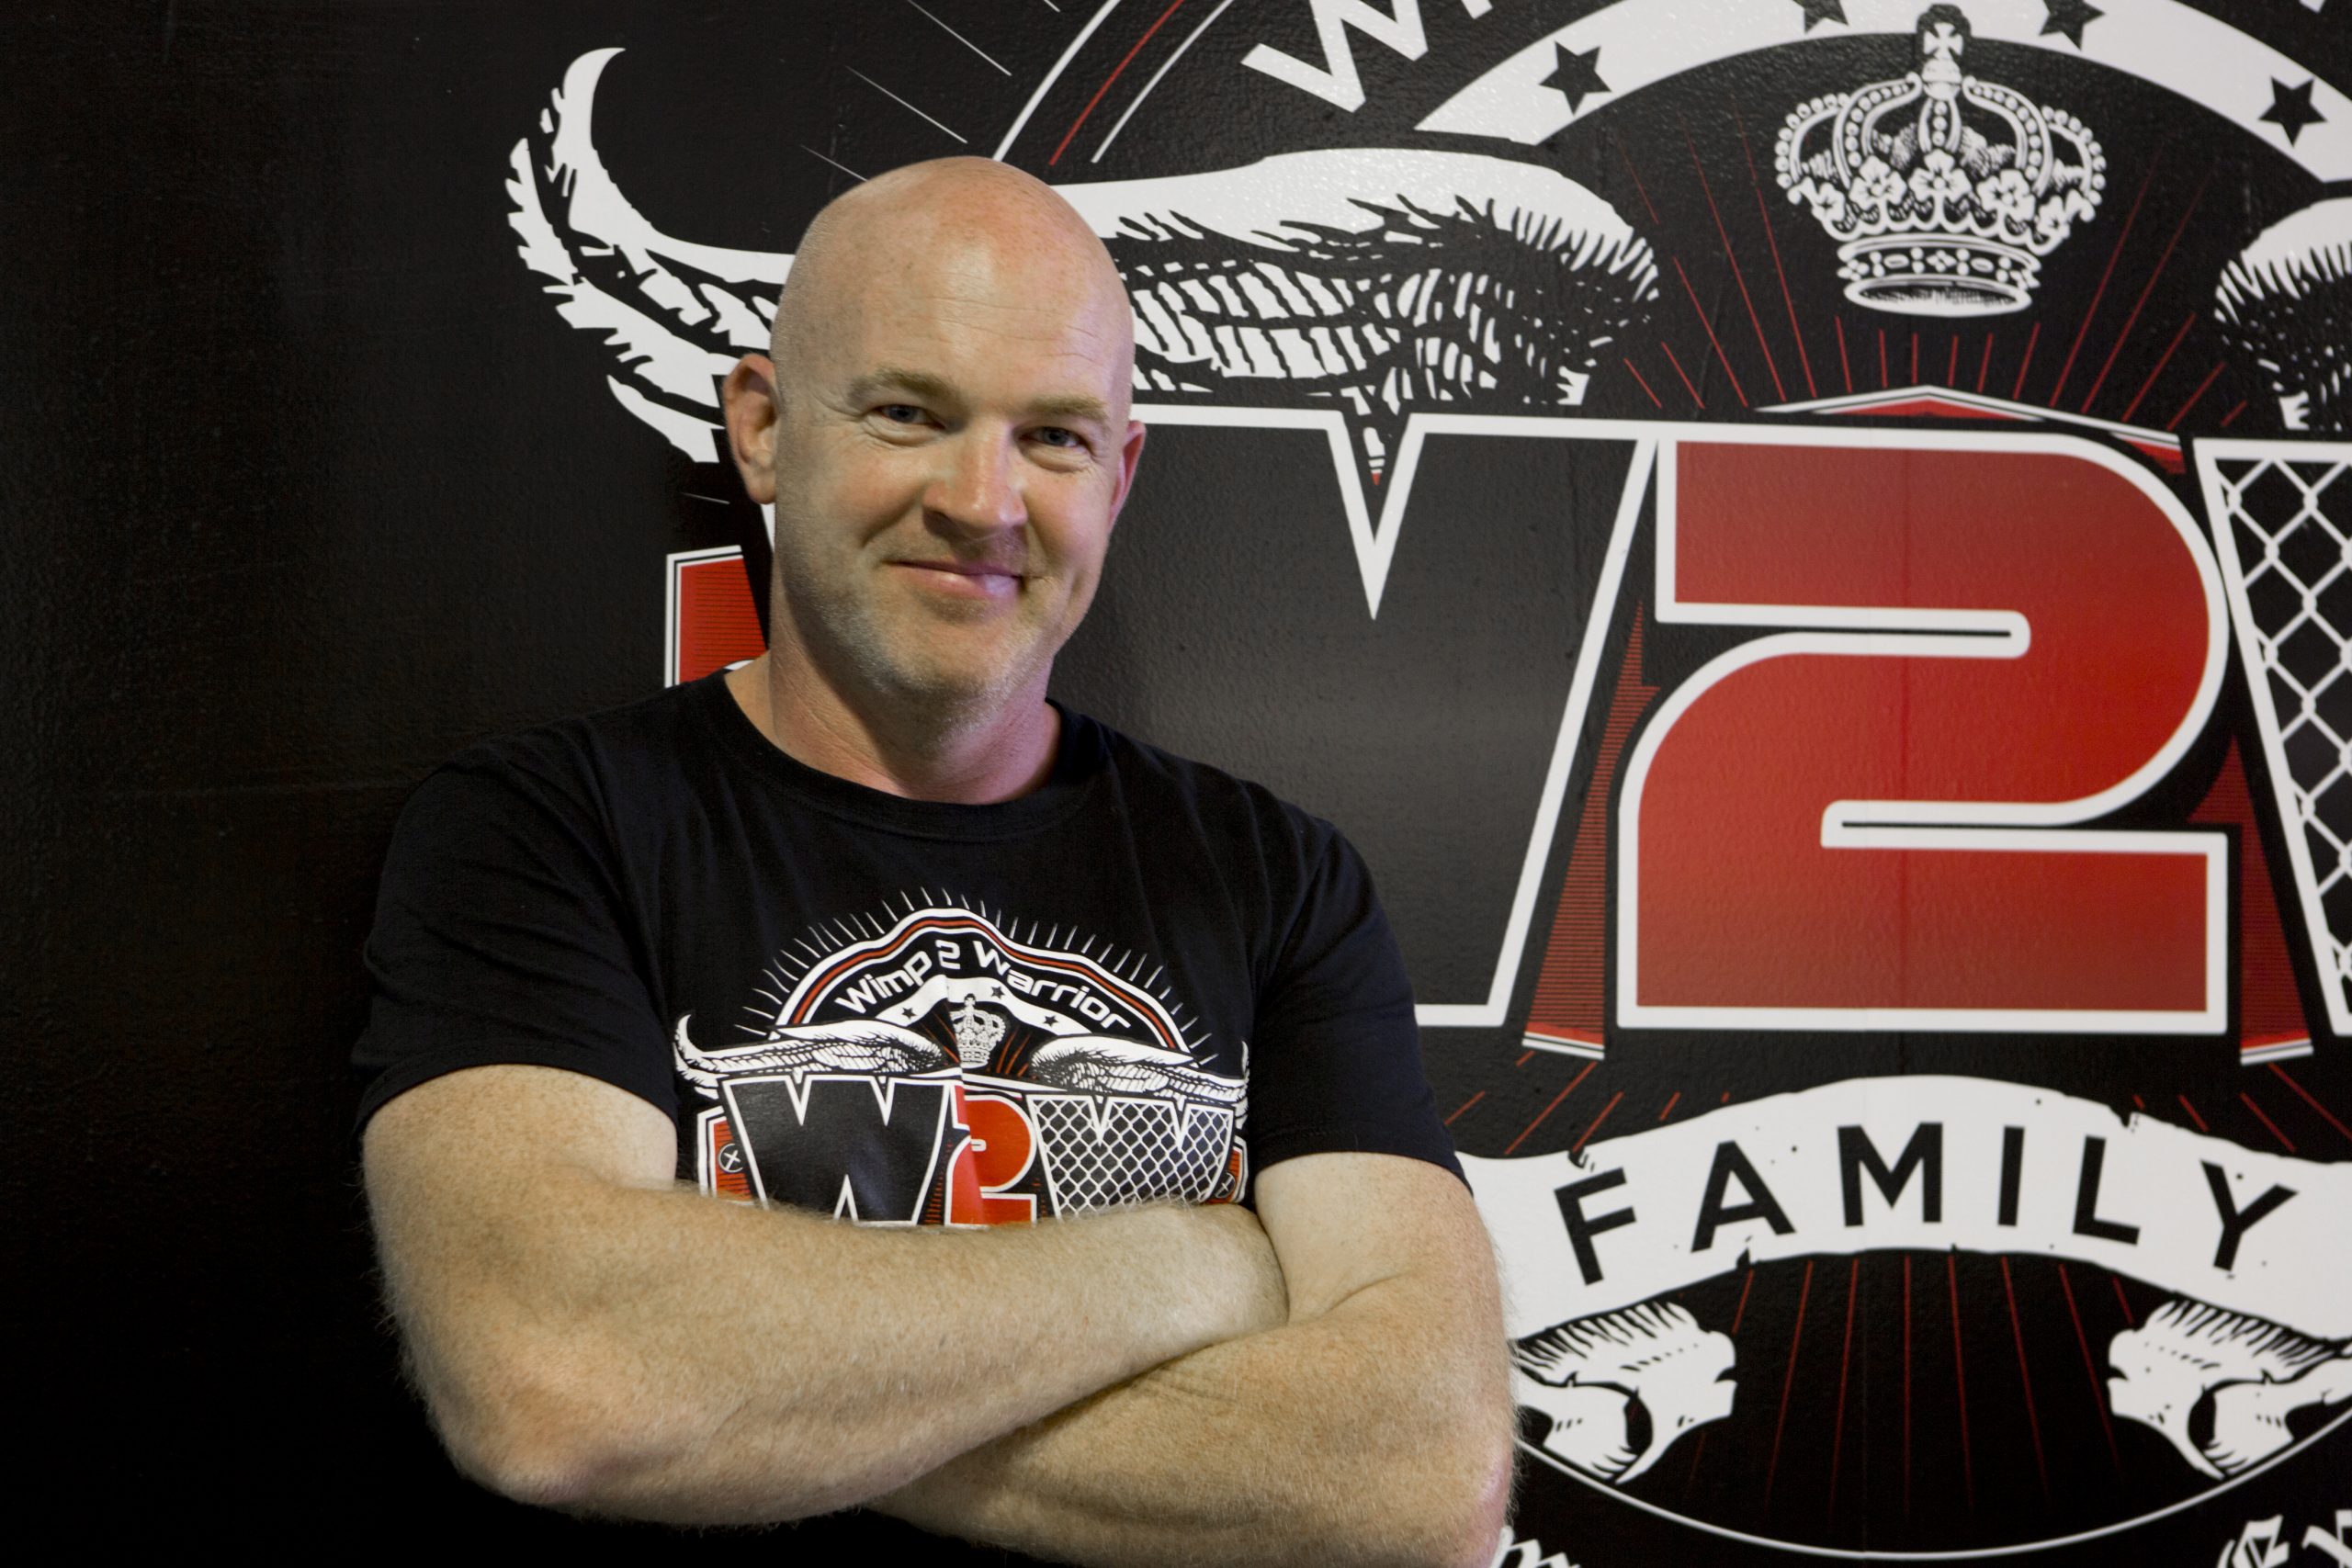 Wimp 2 Warrior Adopts IMMAF Gradings: Richie Cranny becomes VP for IMMAF Australia